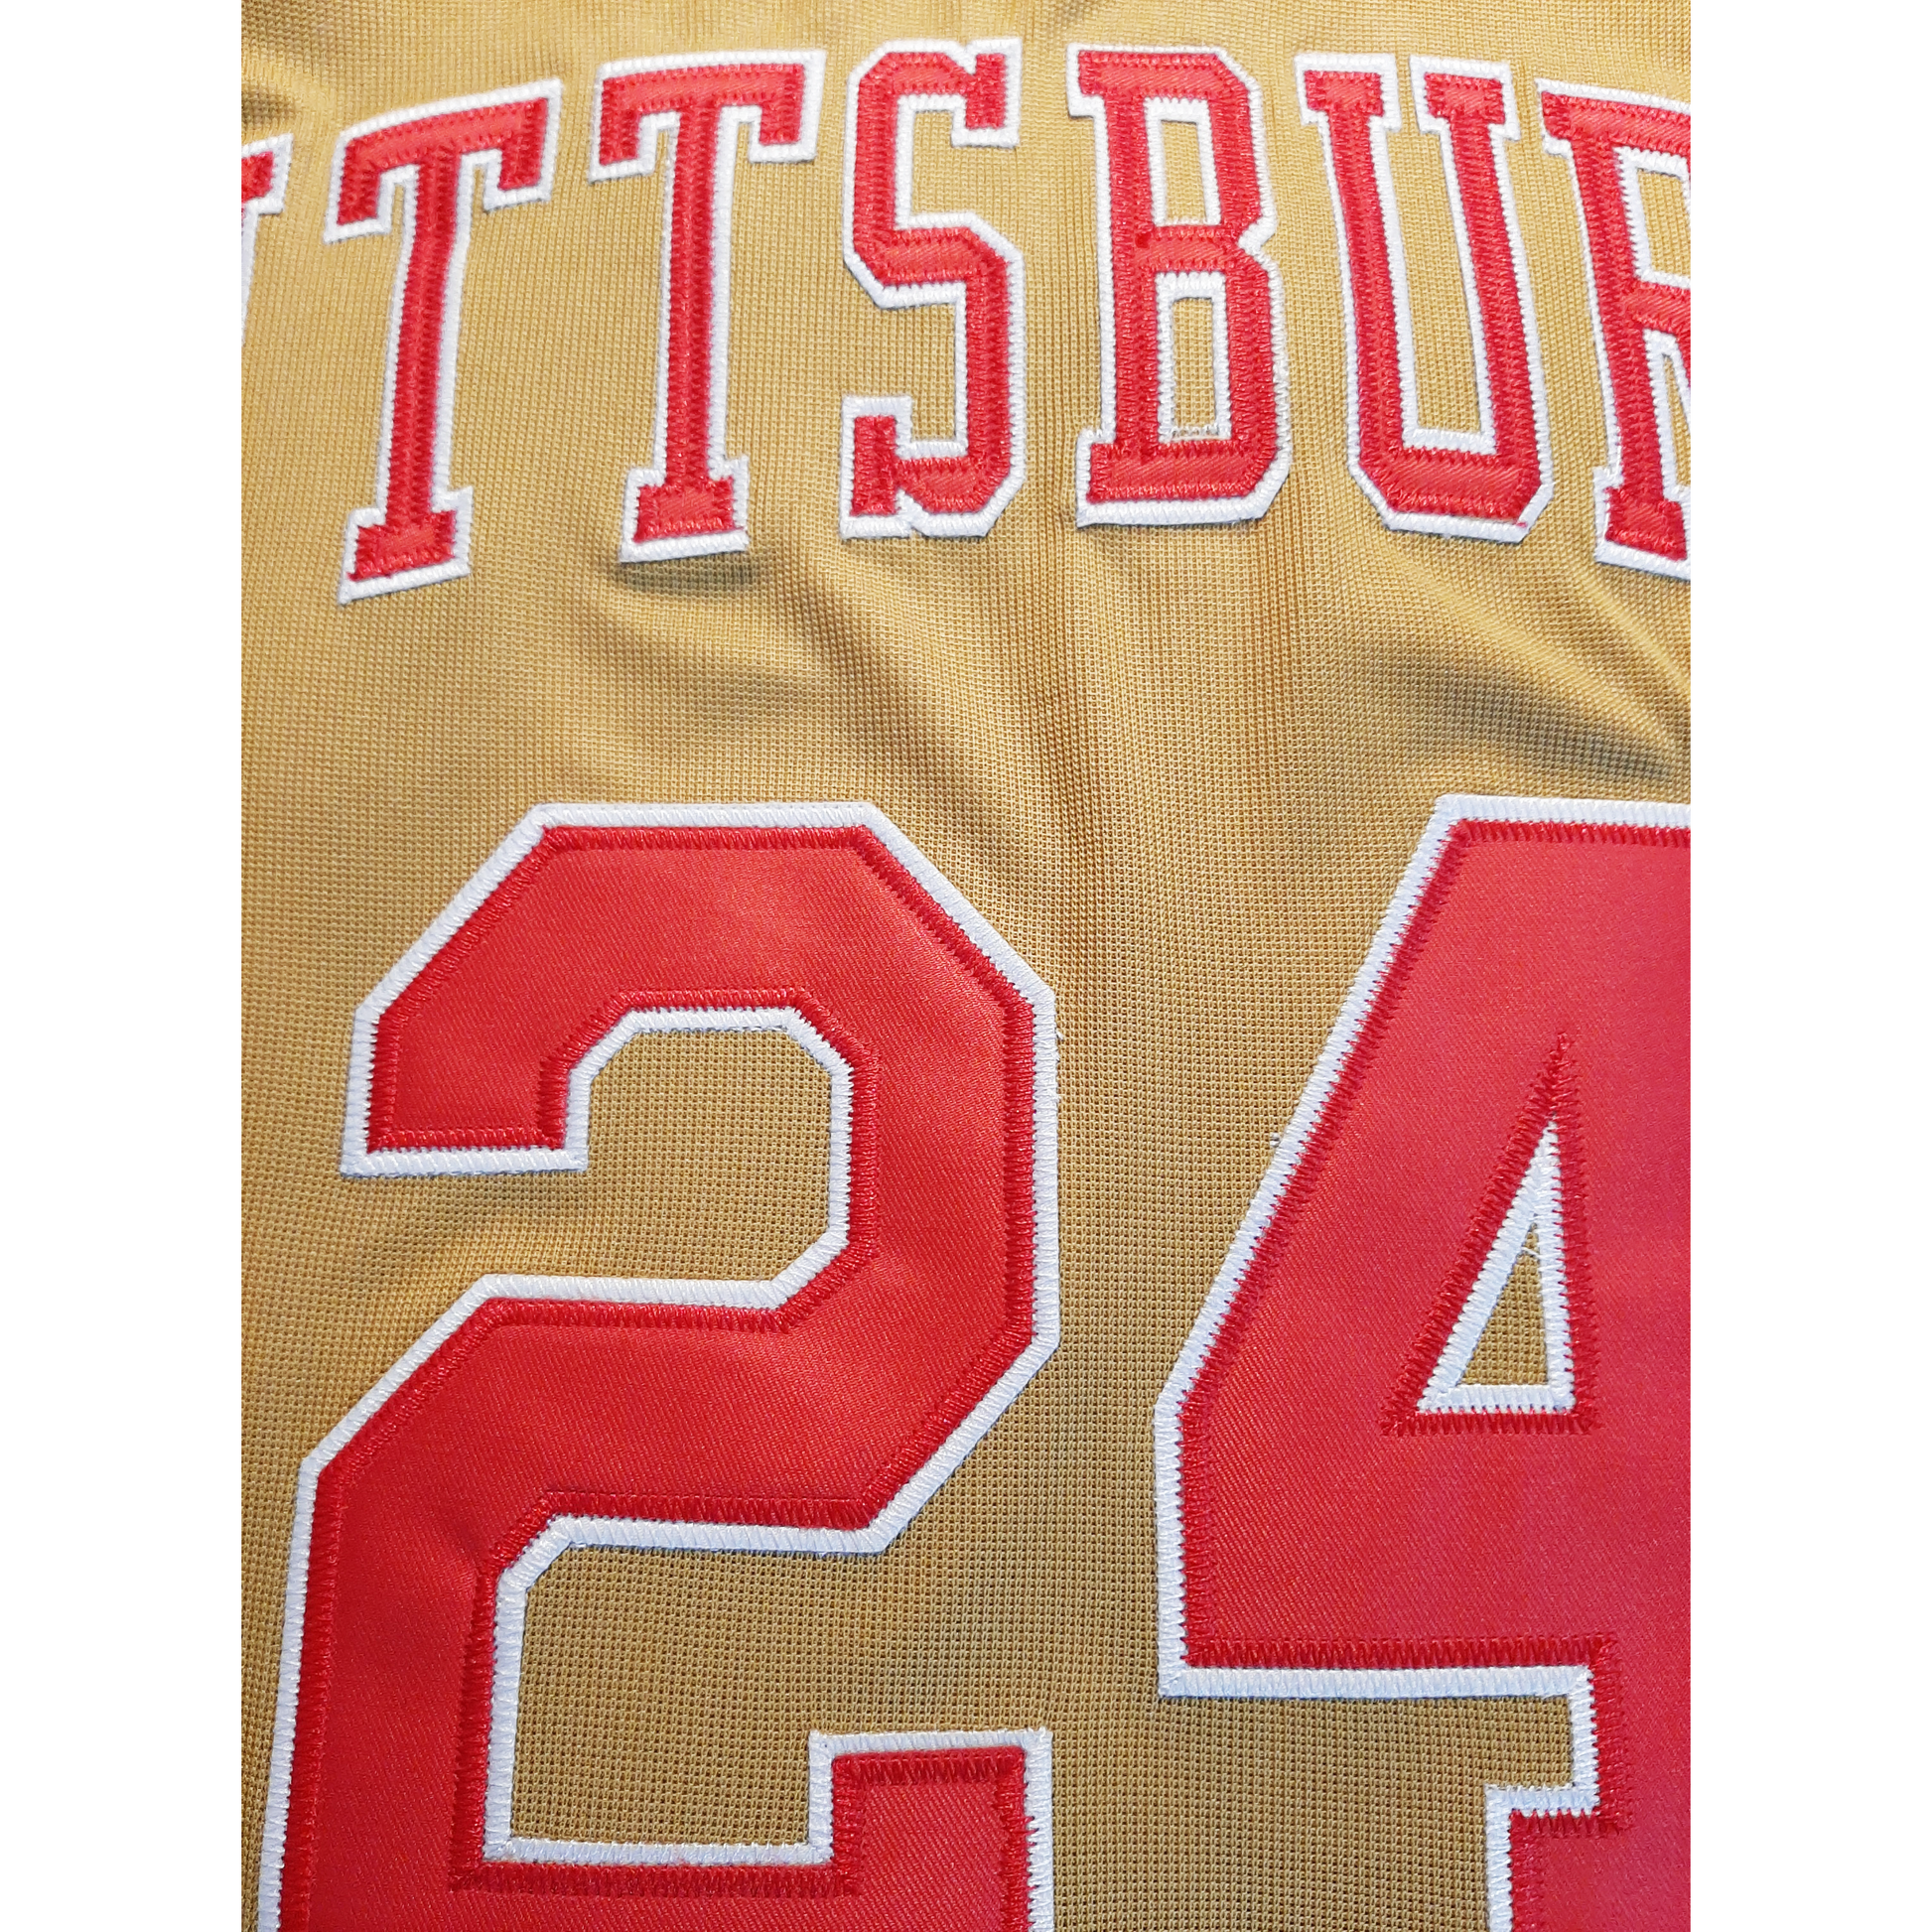 Pittsburgh Pipers ABA Vintage Basketball Jersey FREE SHIPPING 